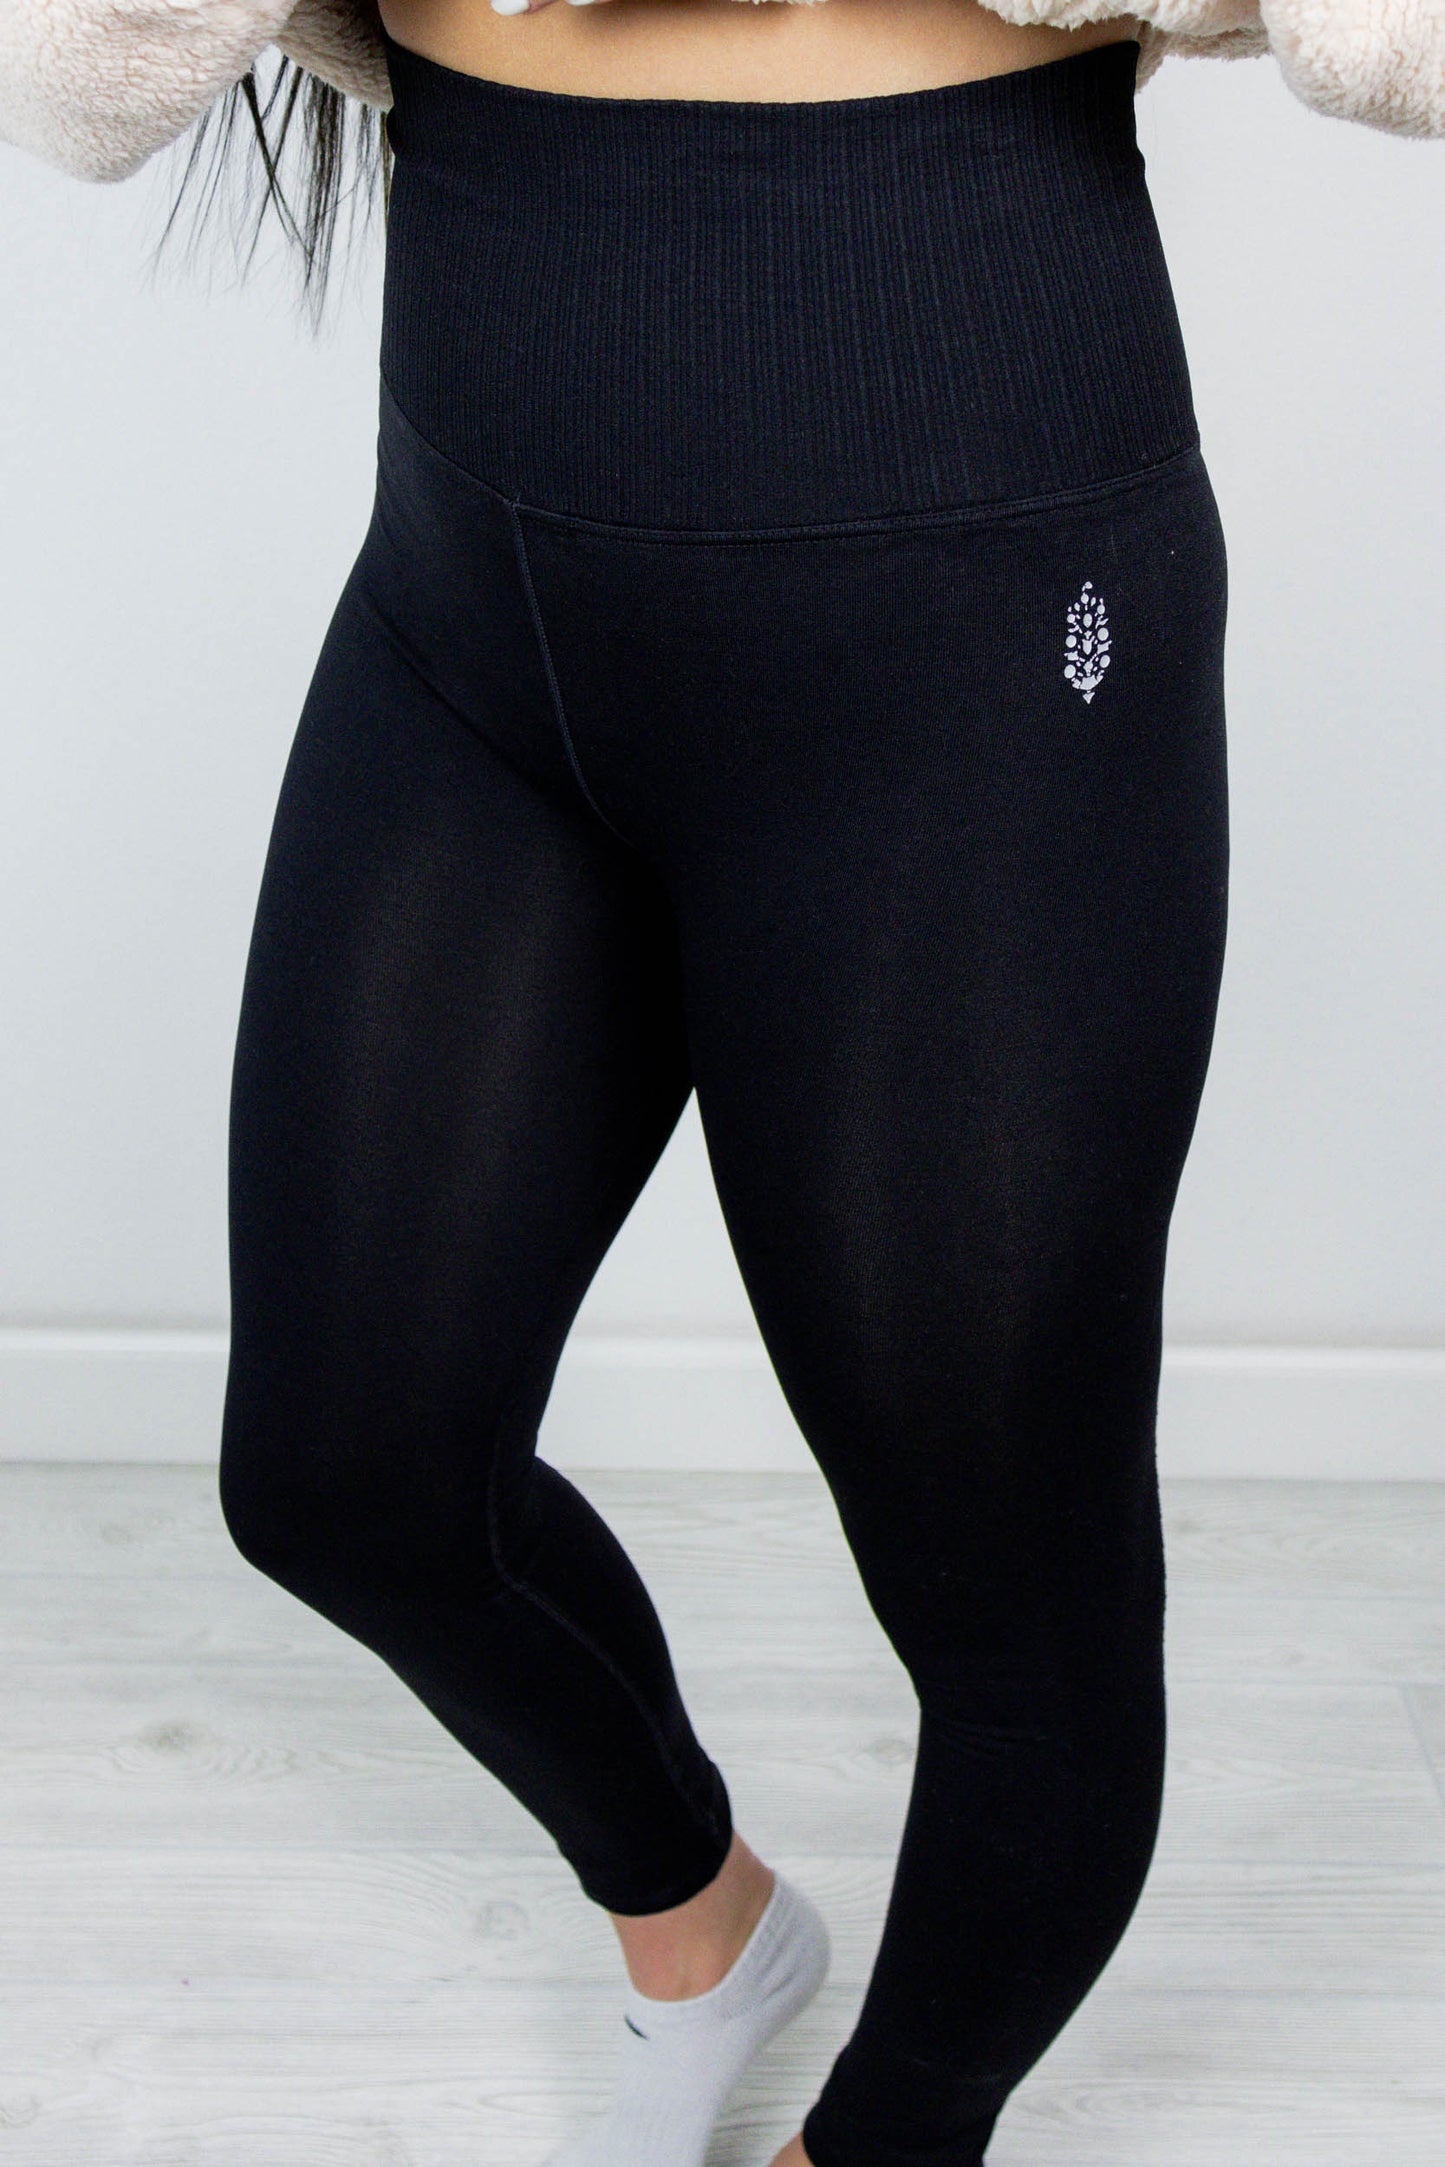 Shop Comfortable Leggings in All Styles and Sizes – The Vault